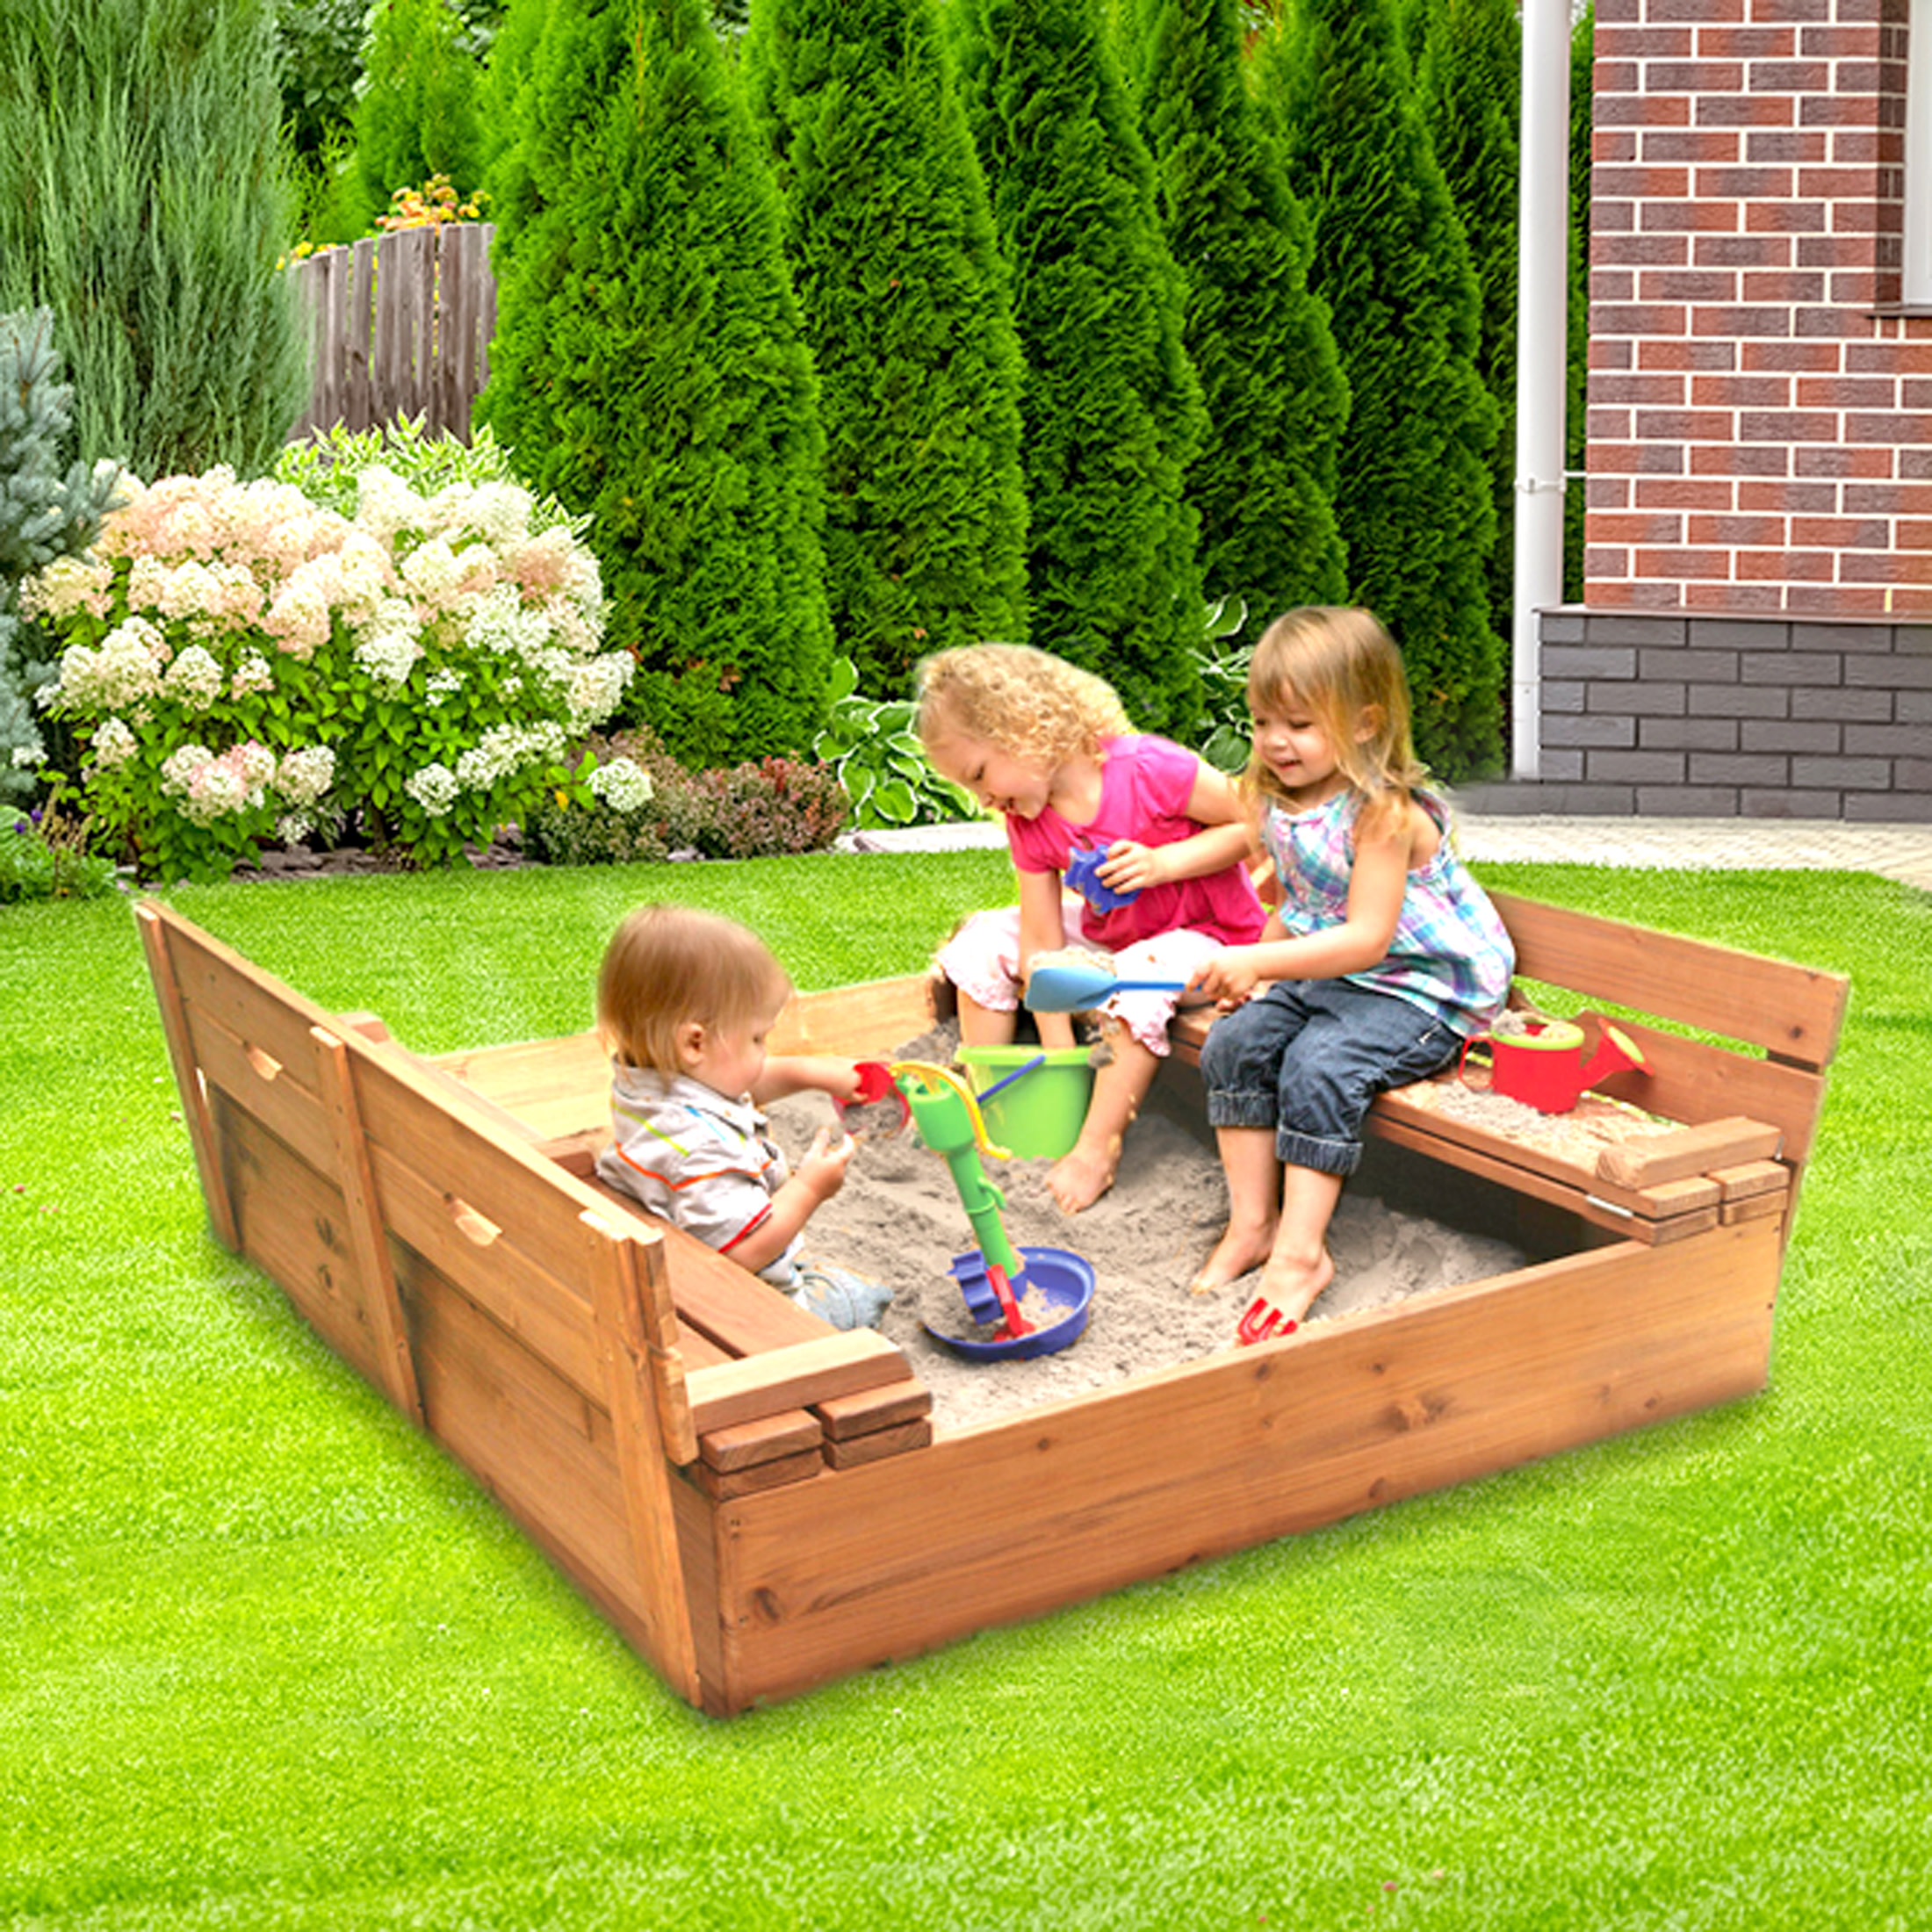 Badger Basket Covered Convertible Cedar Sandbox with Two Bench Seats - Natural - image 3 of 9